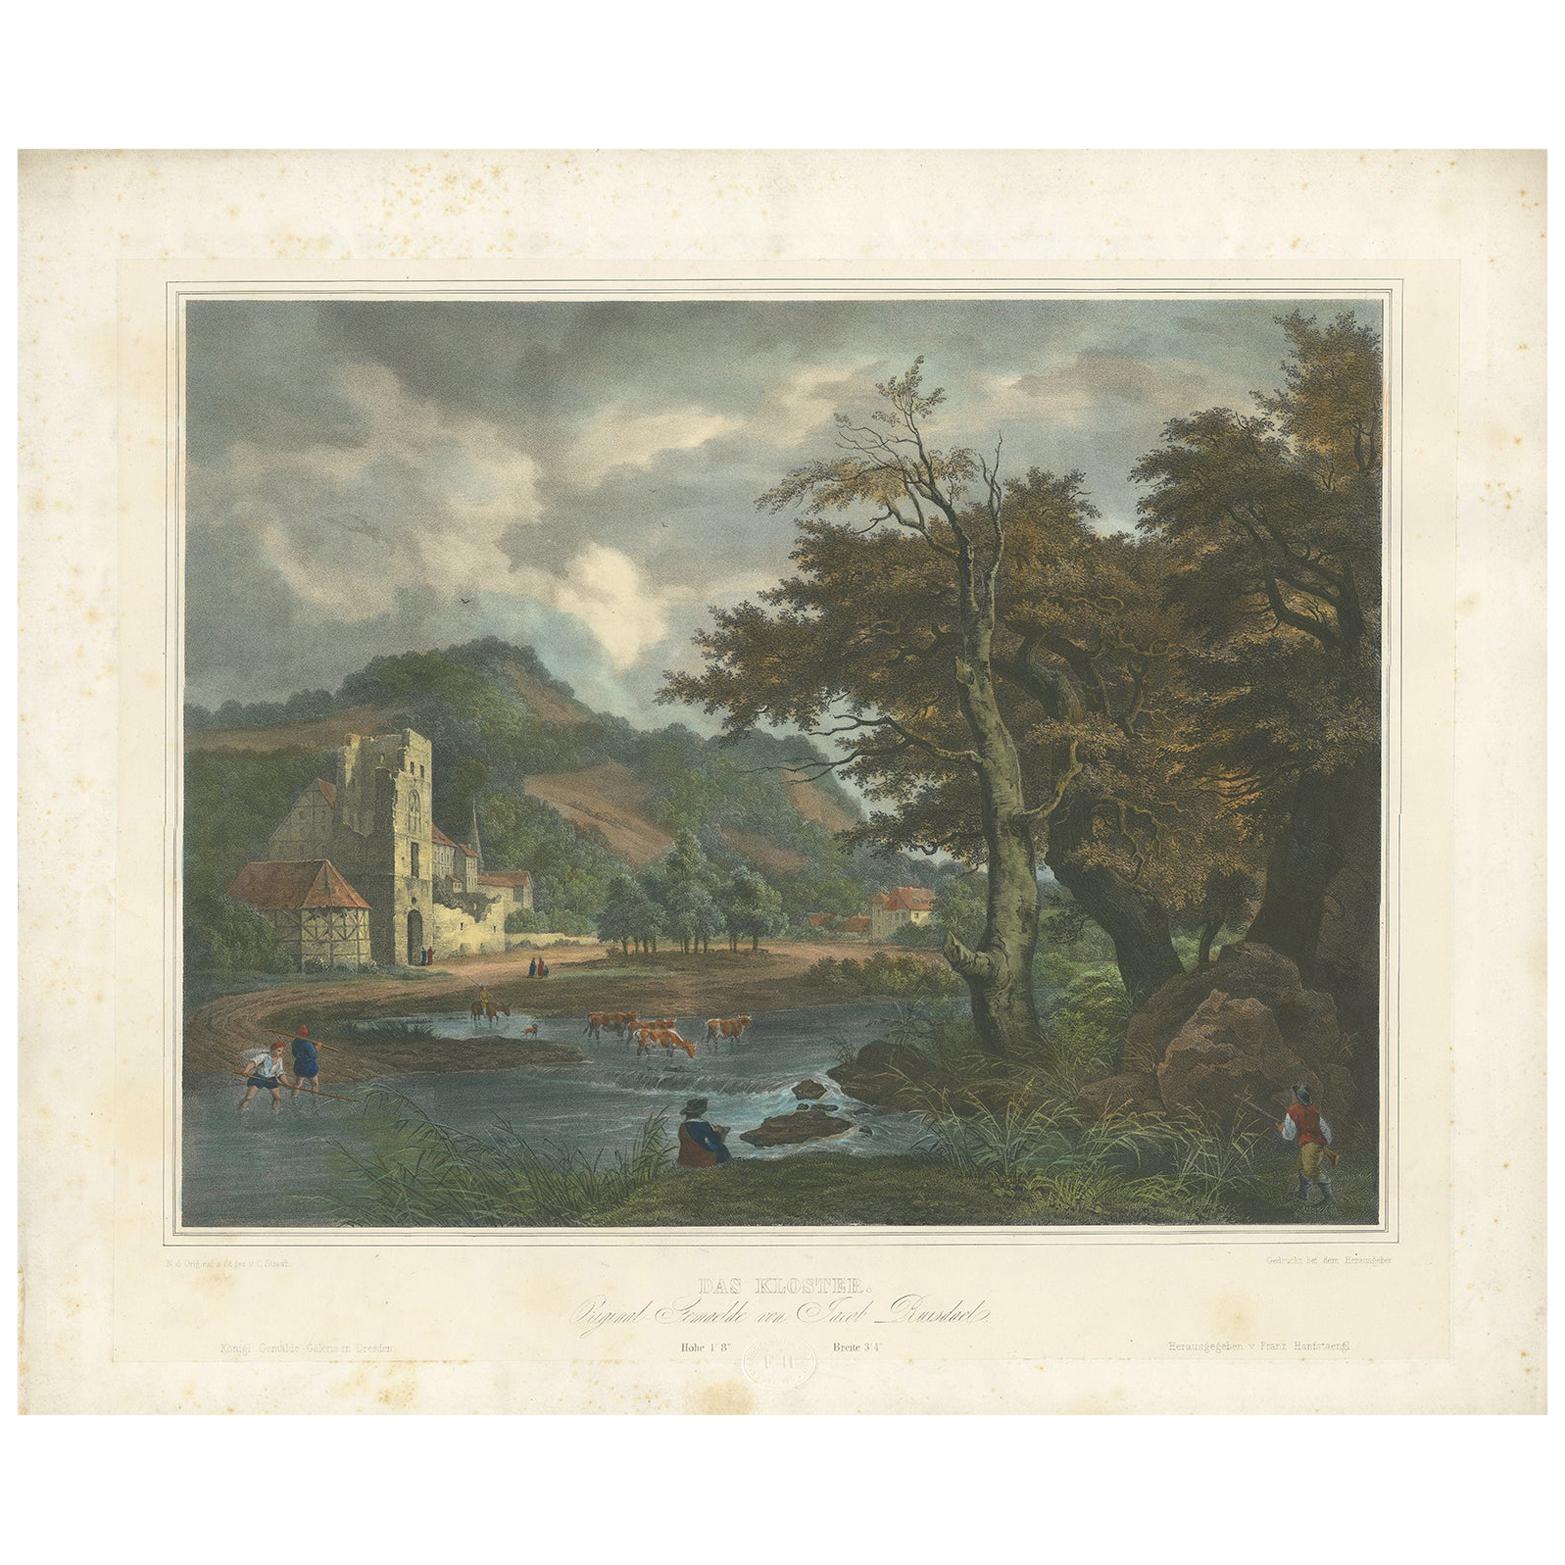 Antique Print of a Landscape with a Shepherd and Cattle, 'circa 1840'